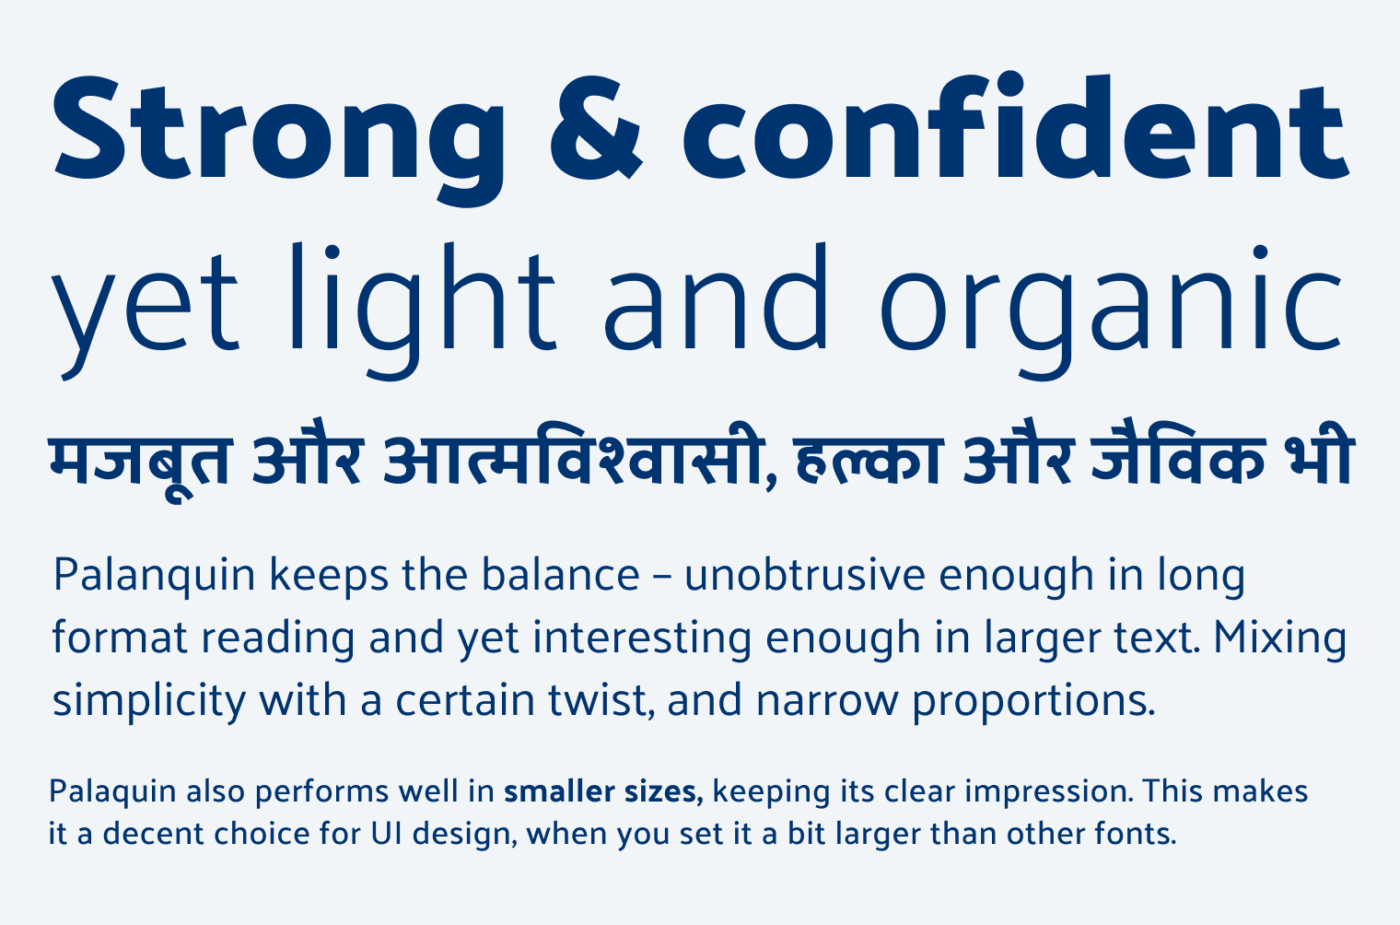 Strong & confident yet light and organic
Palanquin keeps the balance - unobtrusive enough in long format reading and yet interesting enough in larger text. Mixing simplicity with a certain twist, and narrow proportions.
Palaquin also performs well in smaller sizes, keeping its clear impression. This makes it a decent choice for UI design, when you set it a bit larger than other fonts.